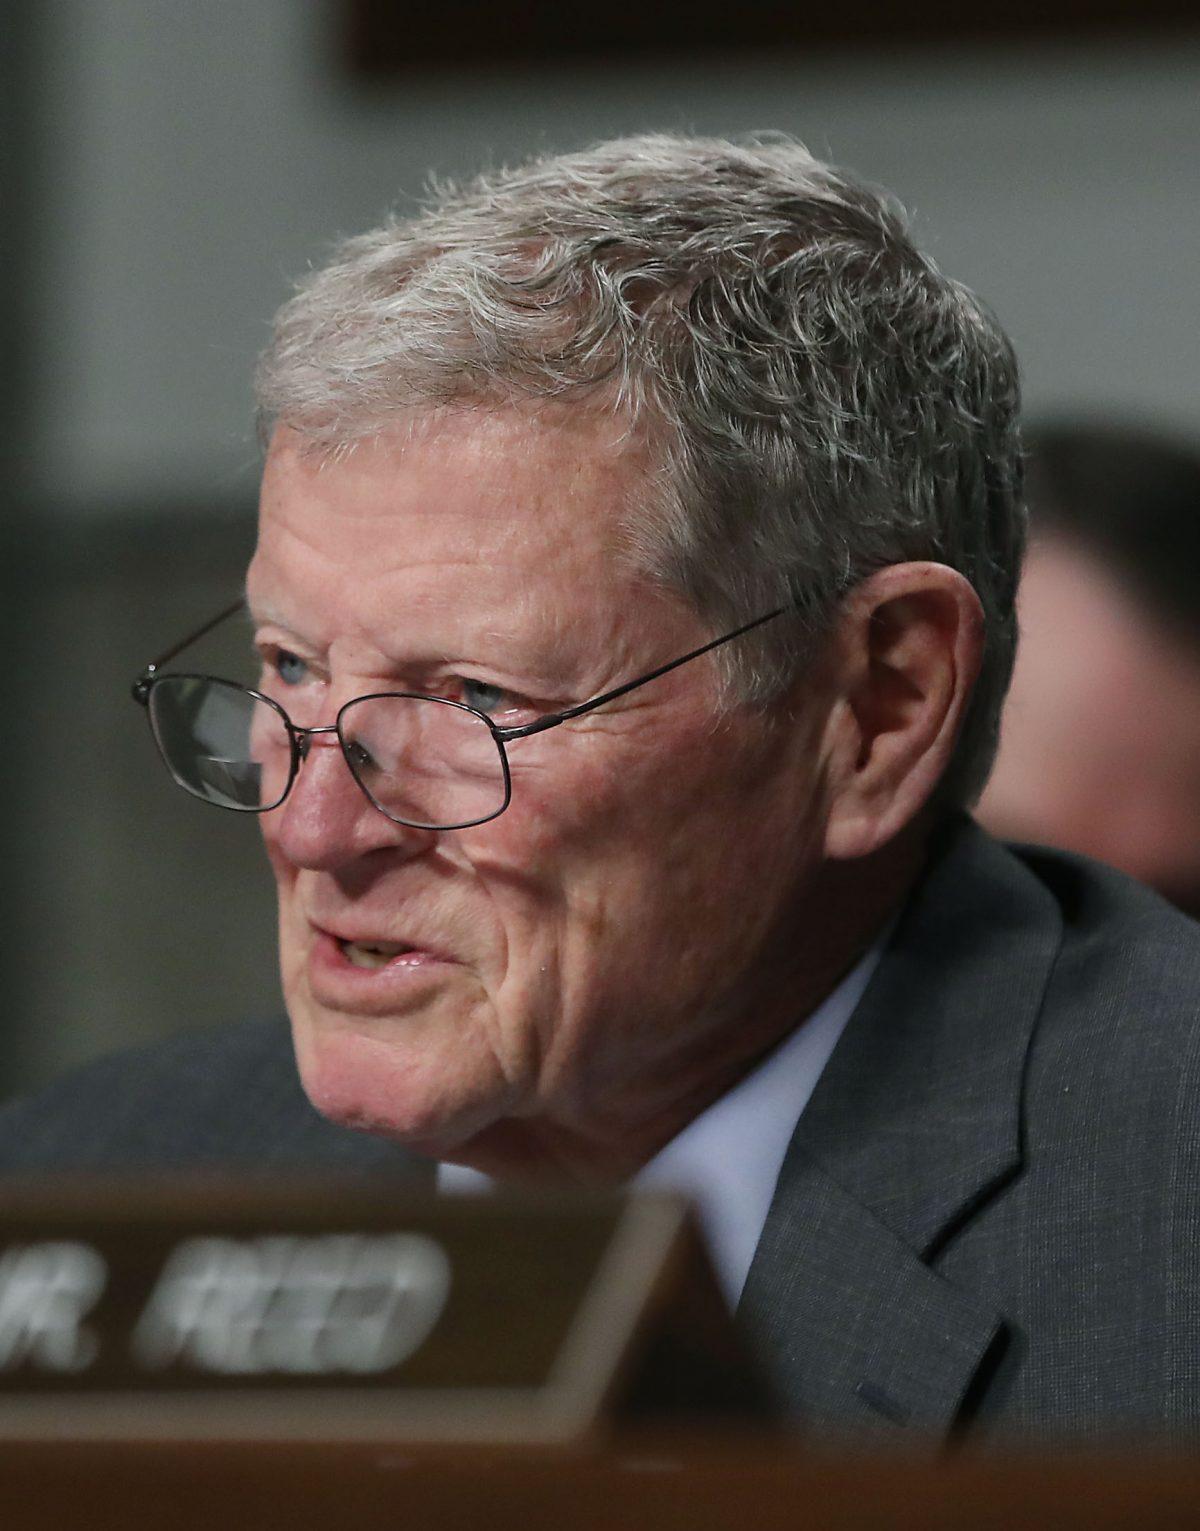 Chairman James Inhofe (R-Okla.) speaks during a Senate Armed Services Committee hearing in Washington on Feb. 14, 2019. (Mark Wilson/Getty Images)